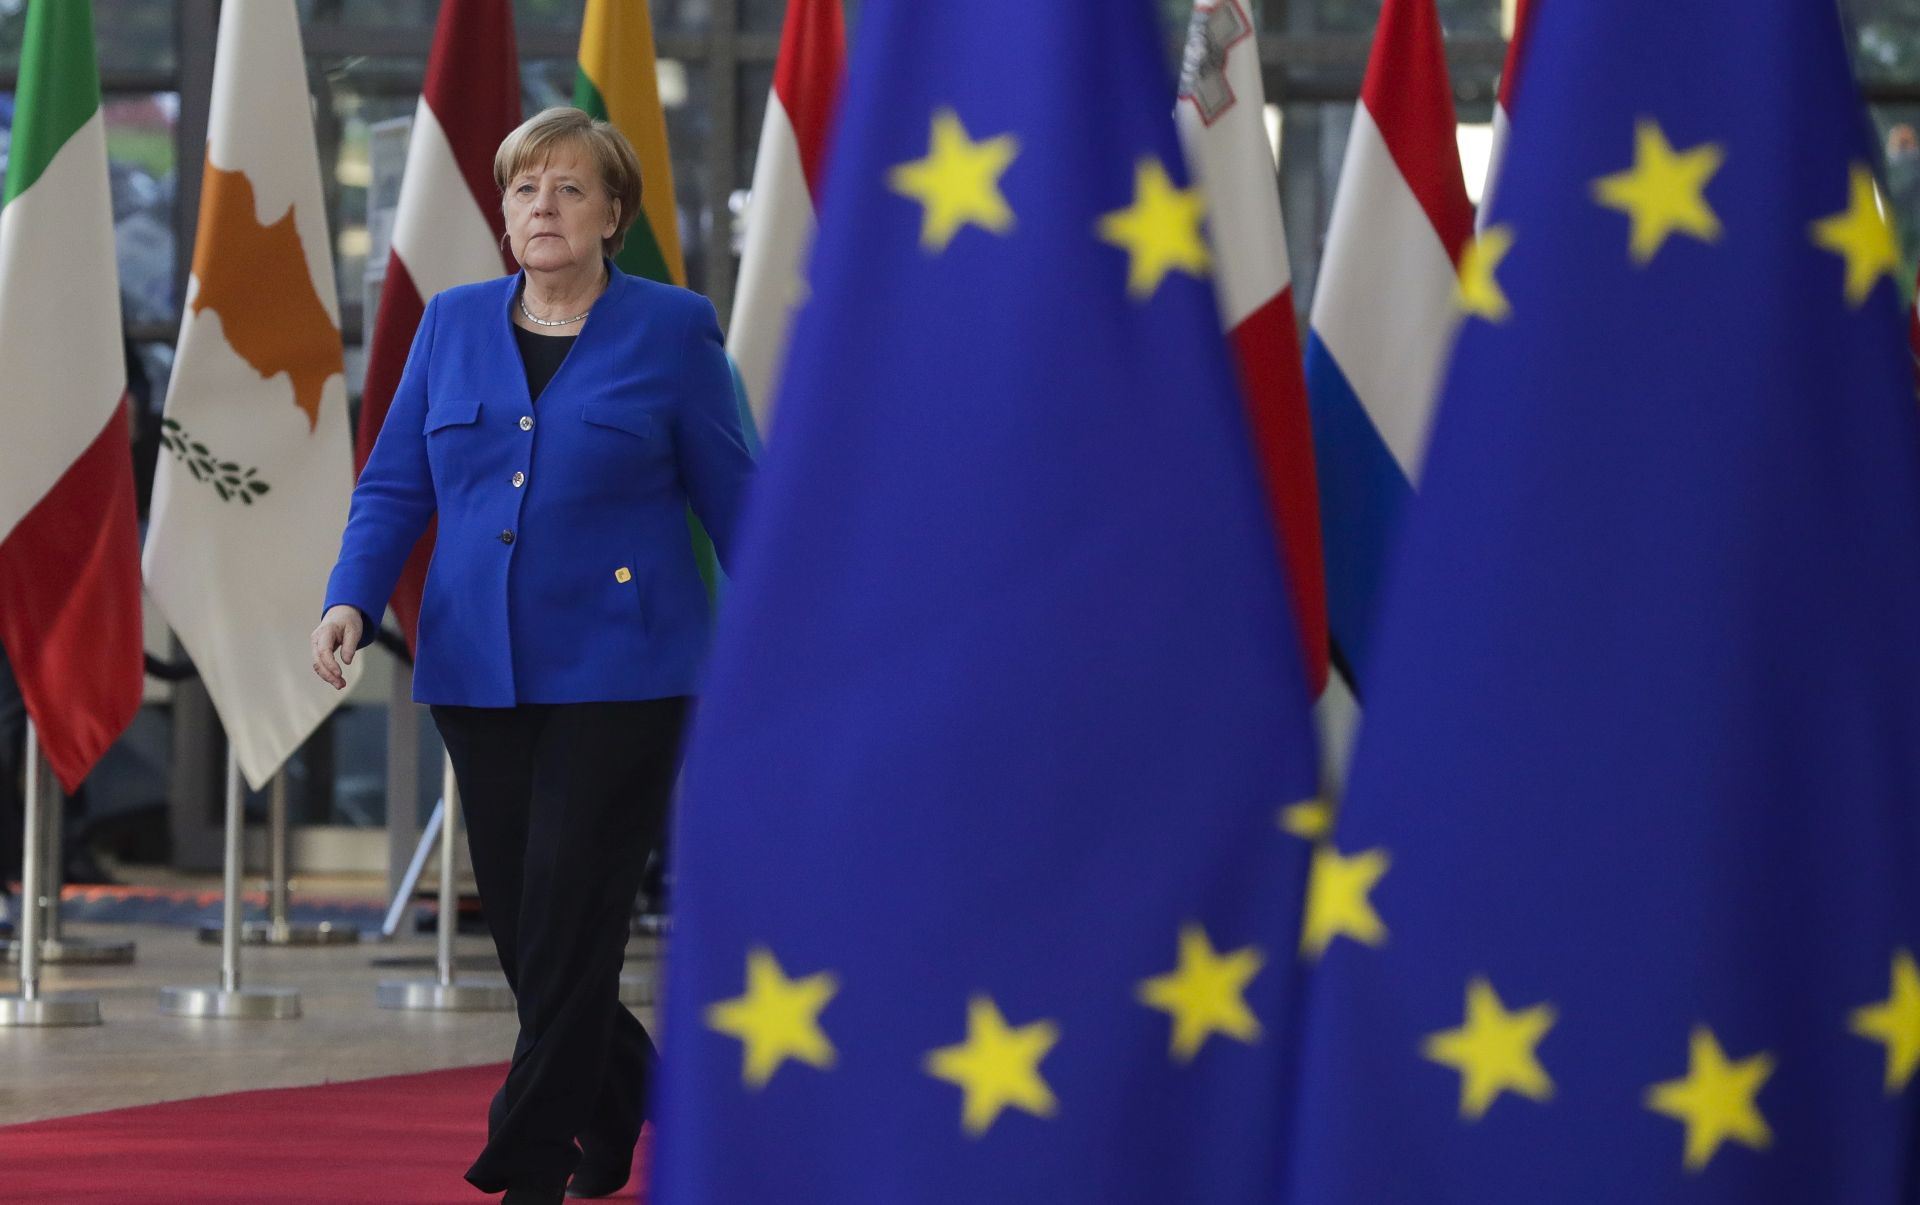 epa07496792 German Federal Chancellor Angela Merkel arrives for a special EU summit on Brexit at the European Council in Brussels, Belgium, 10 April 2019. EU leaders gathered for an emergency summit in Brussels to discuss a new Brexit extension.  EPA/STEPHANIE LECOCQ